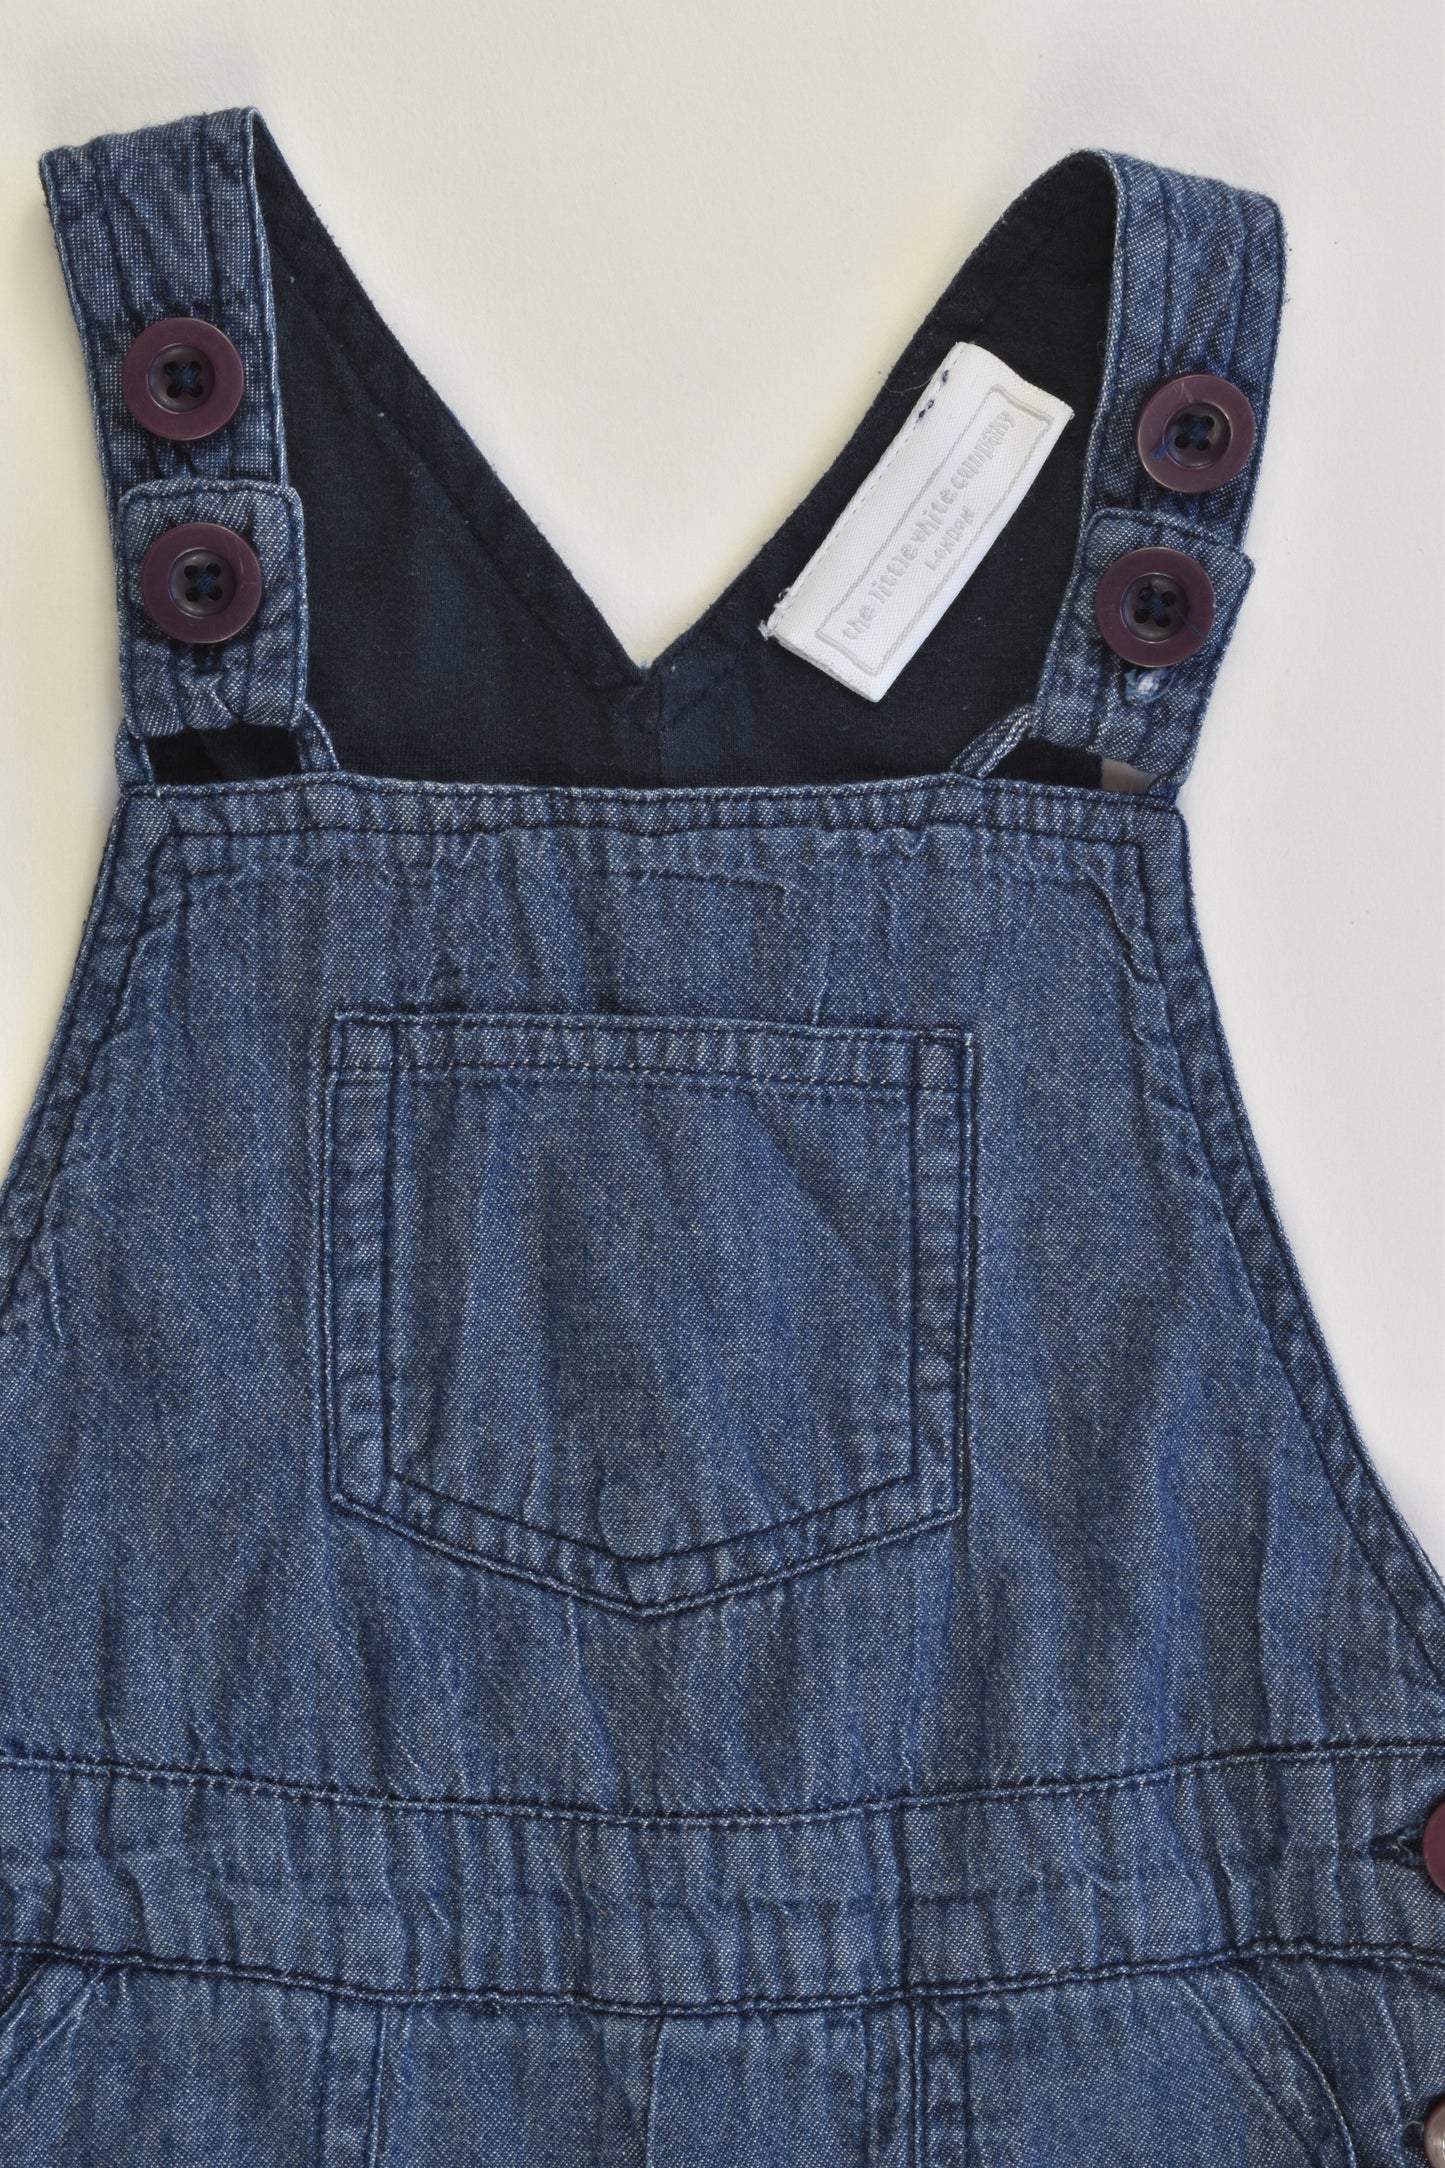 The Little White Company London Size 9-12 months Soft Lined Denim Overalls